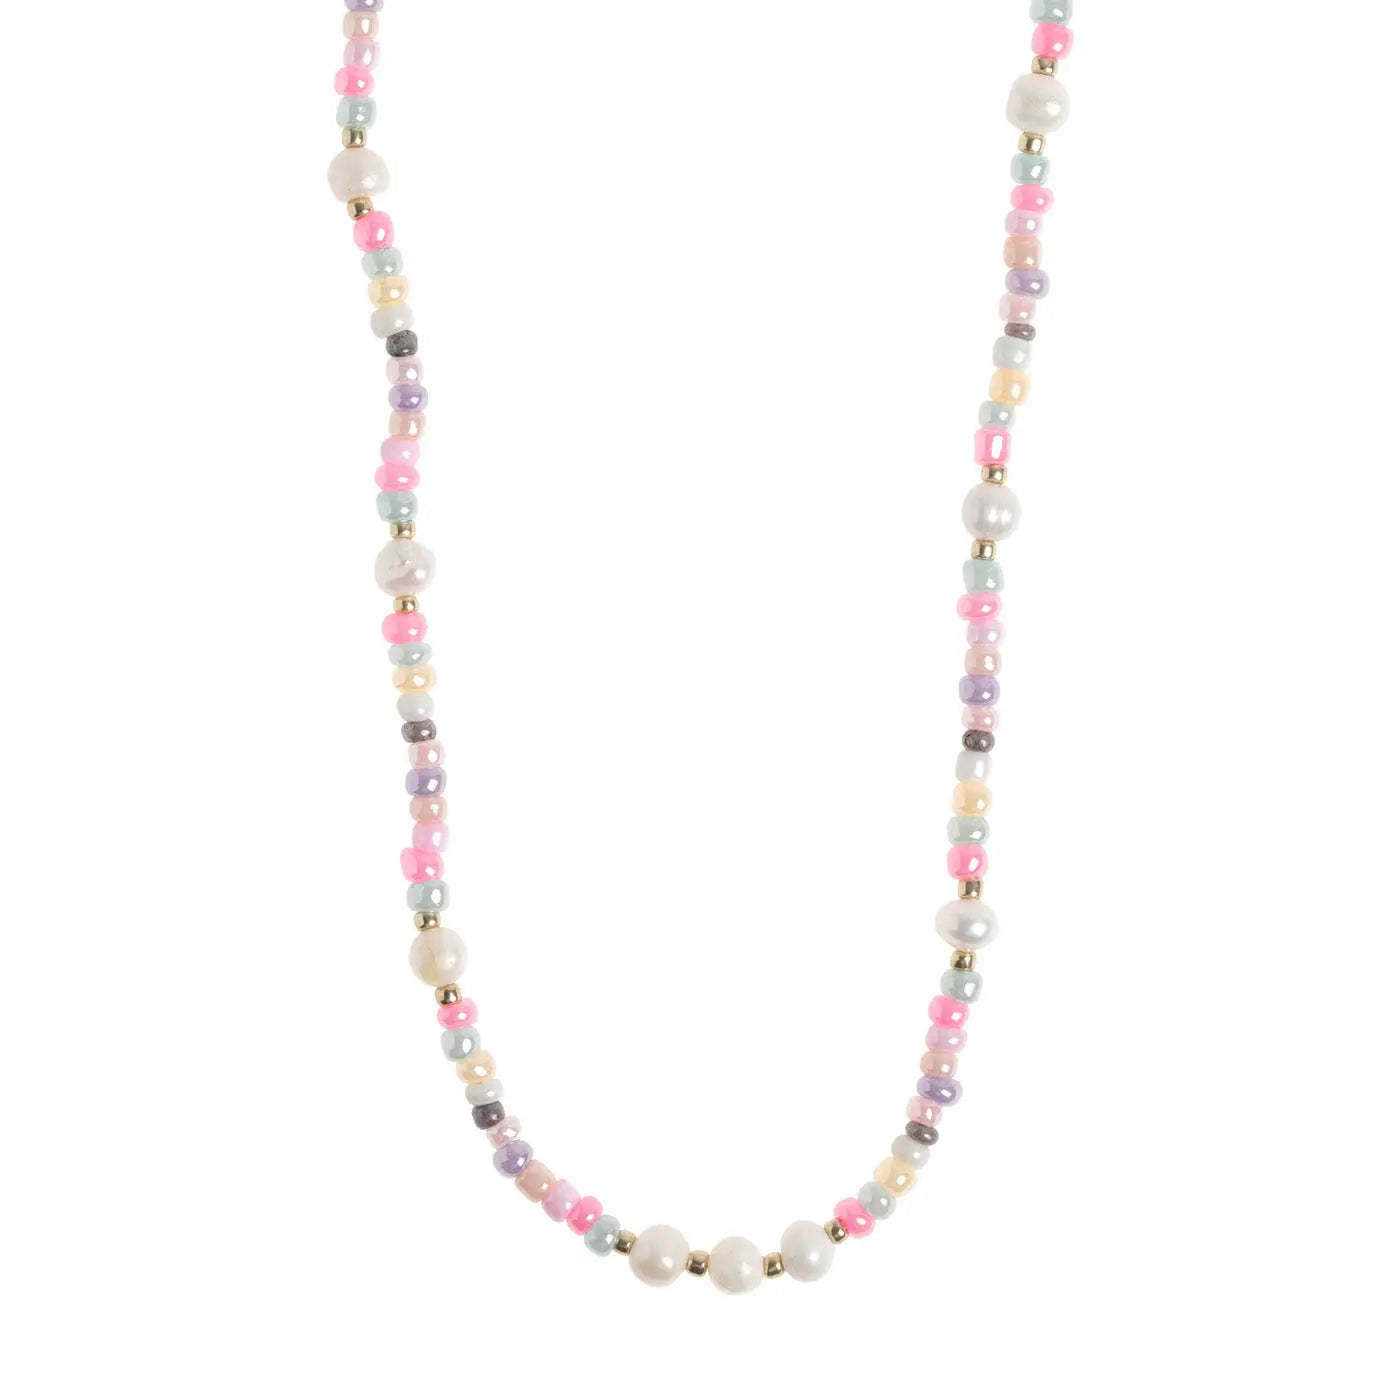 PASTEL BEADS Necklace - Pink